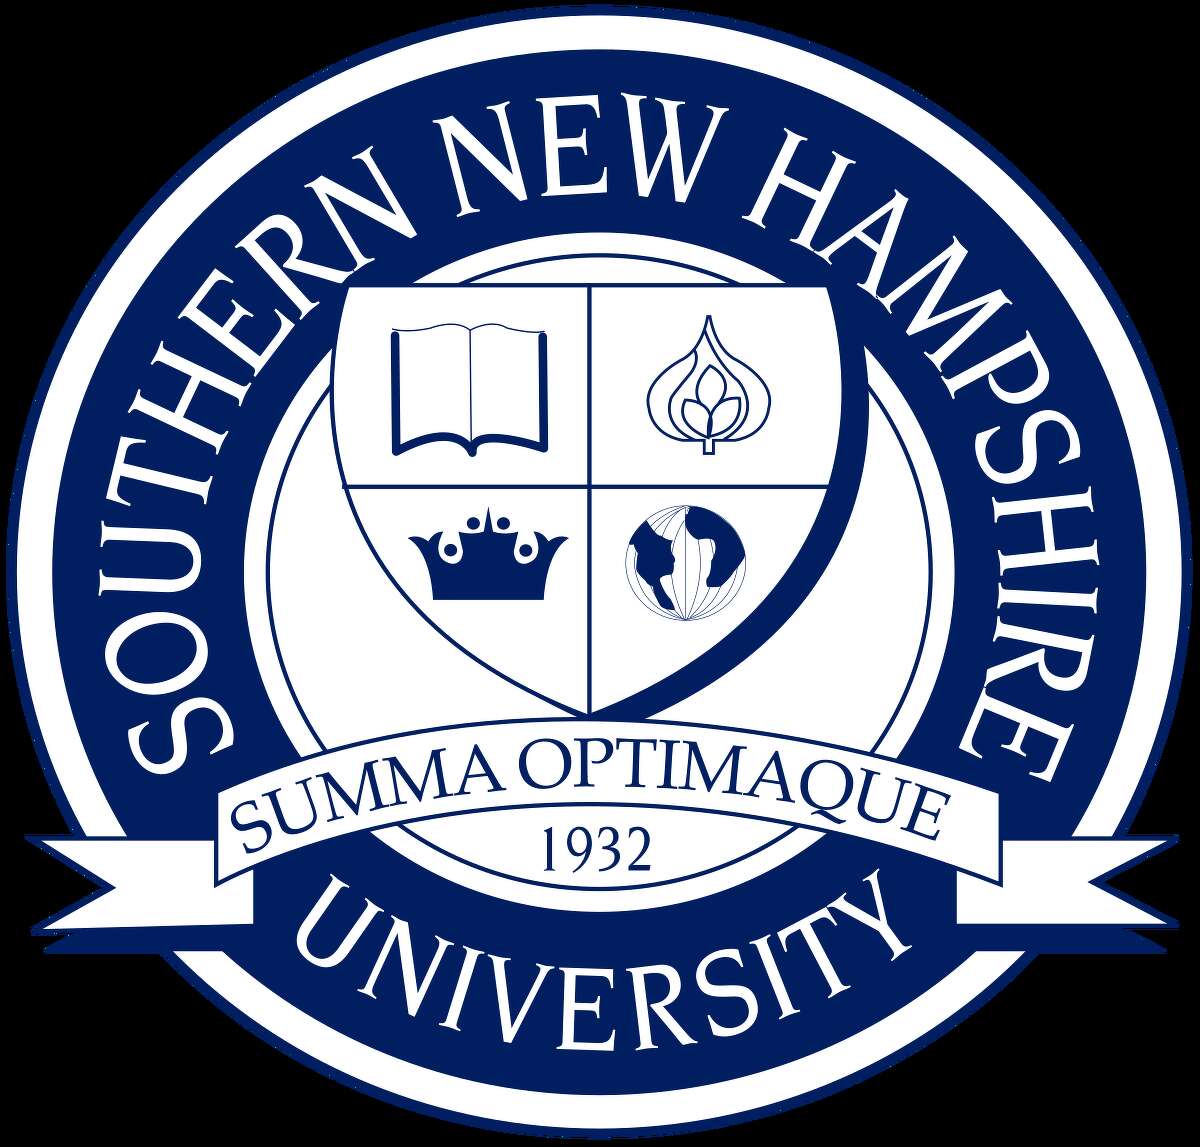 The Southern New Hampshire University released its fall 2021 dean's list. 